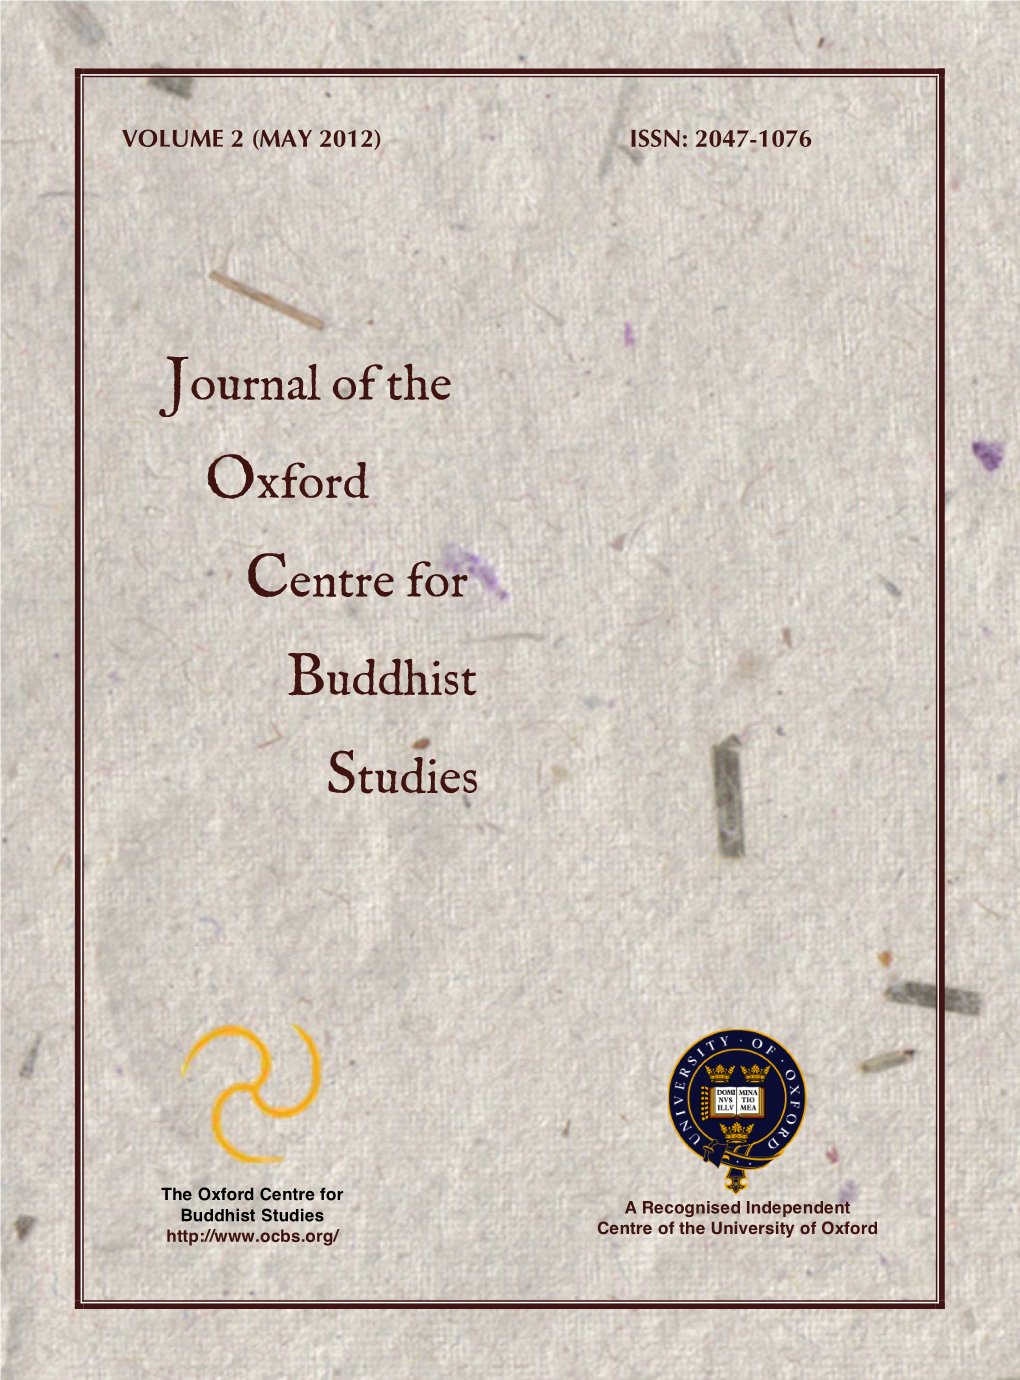 Journal of the Oxford Centre for Buddhist Studies, Vol. 2, May 2012